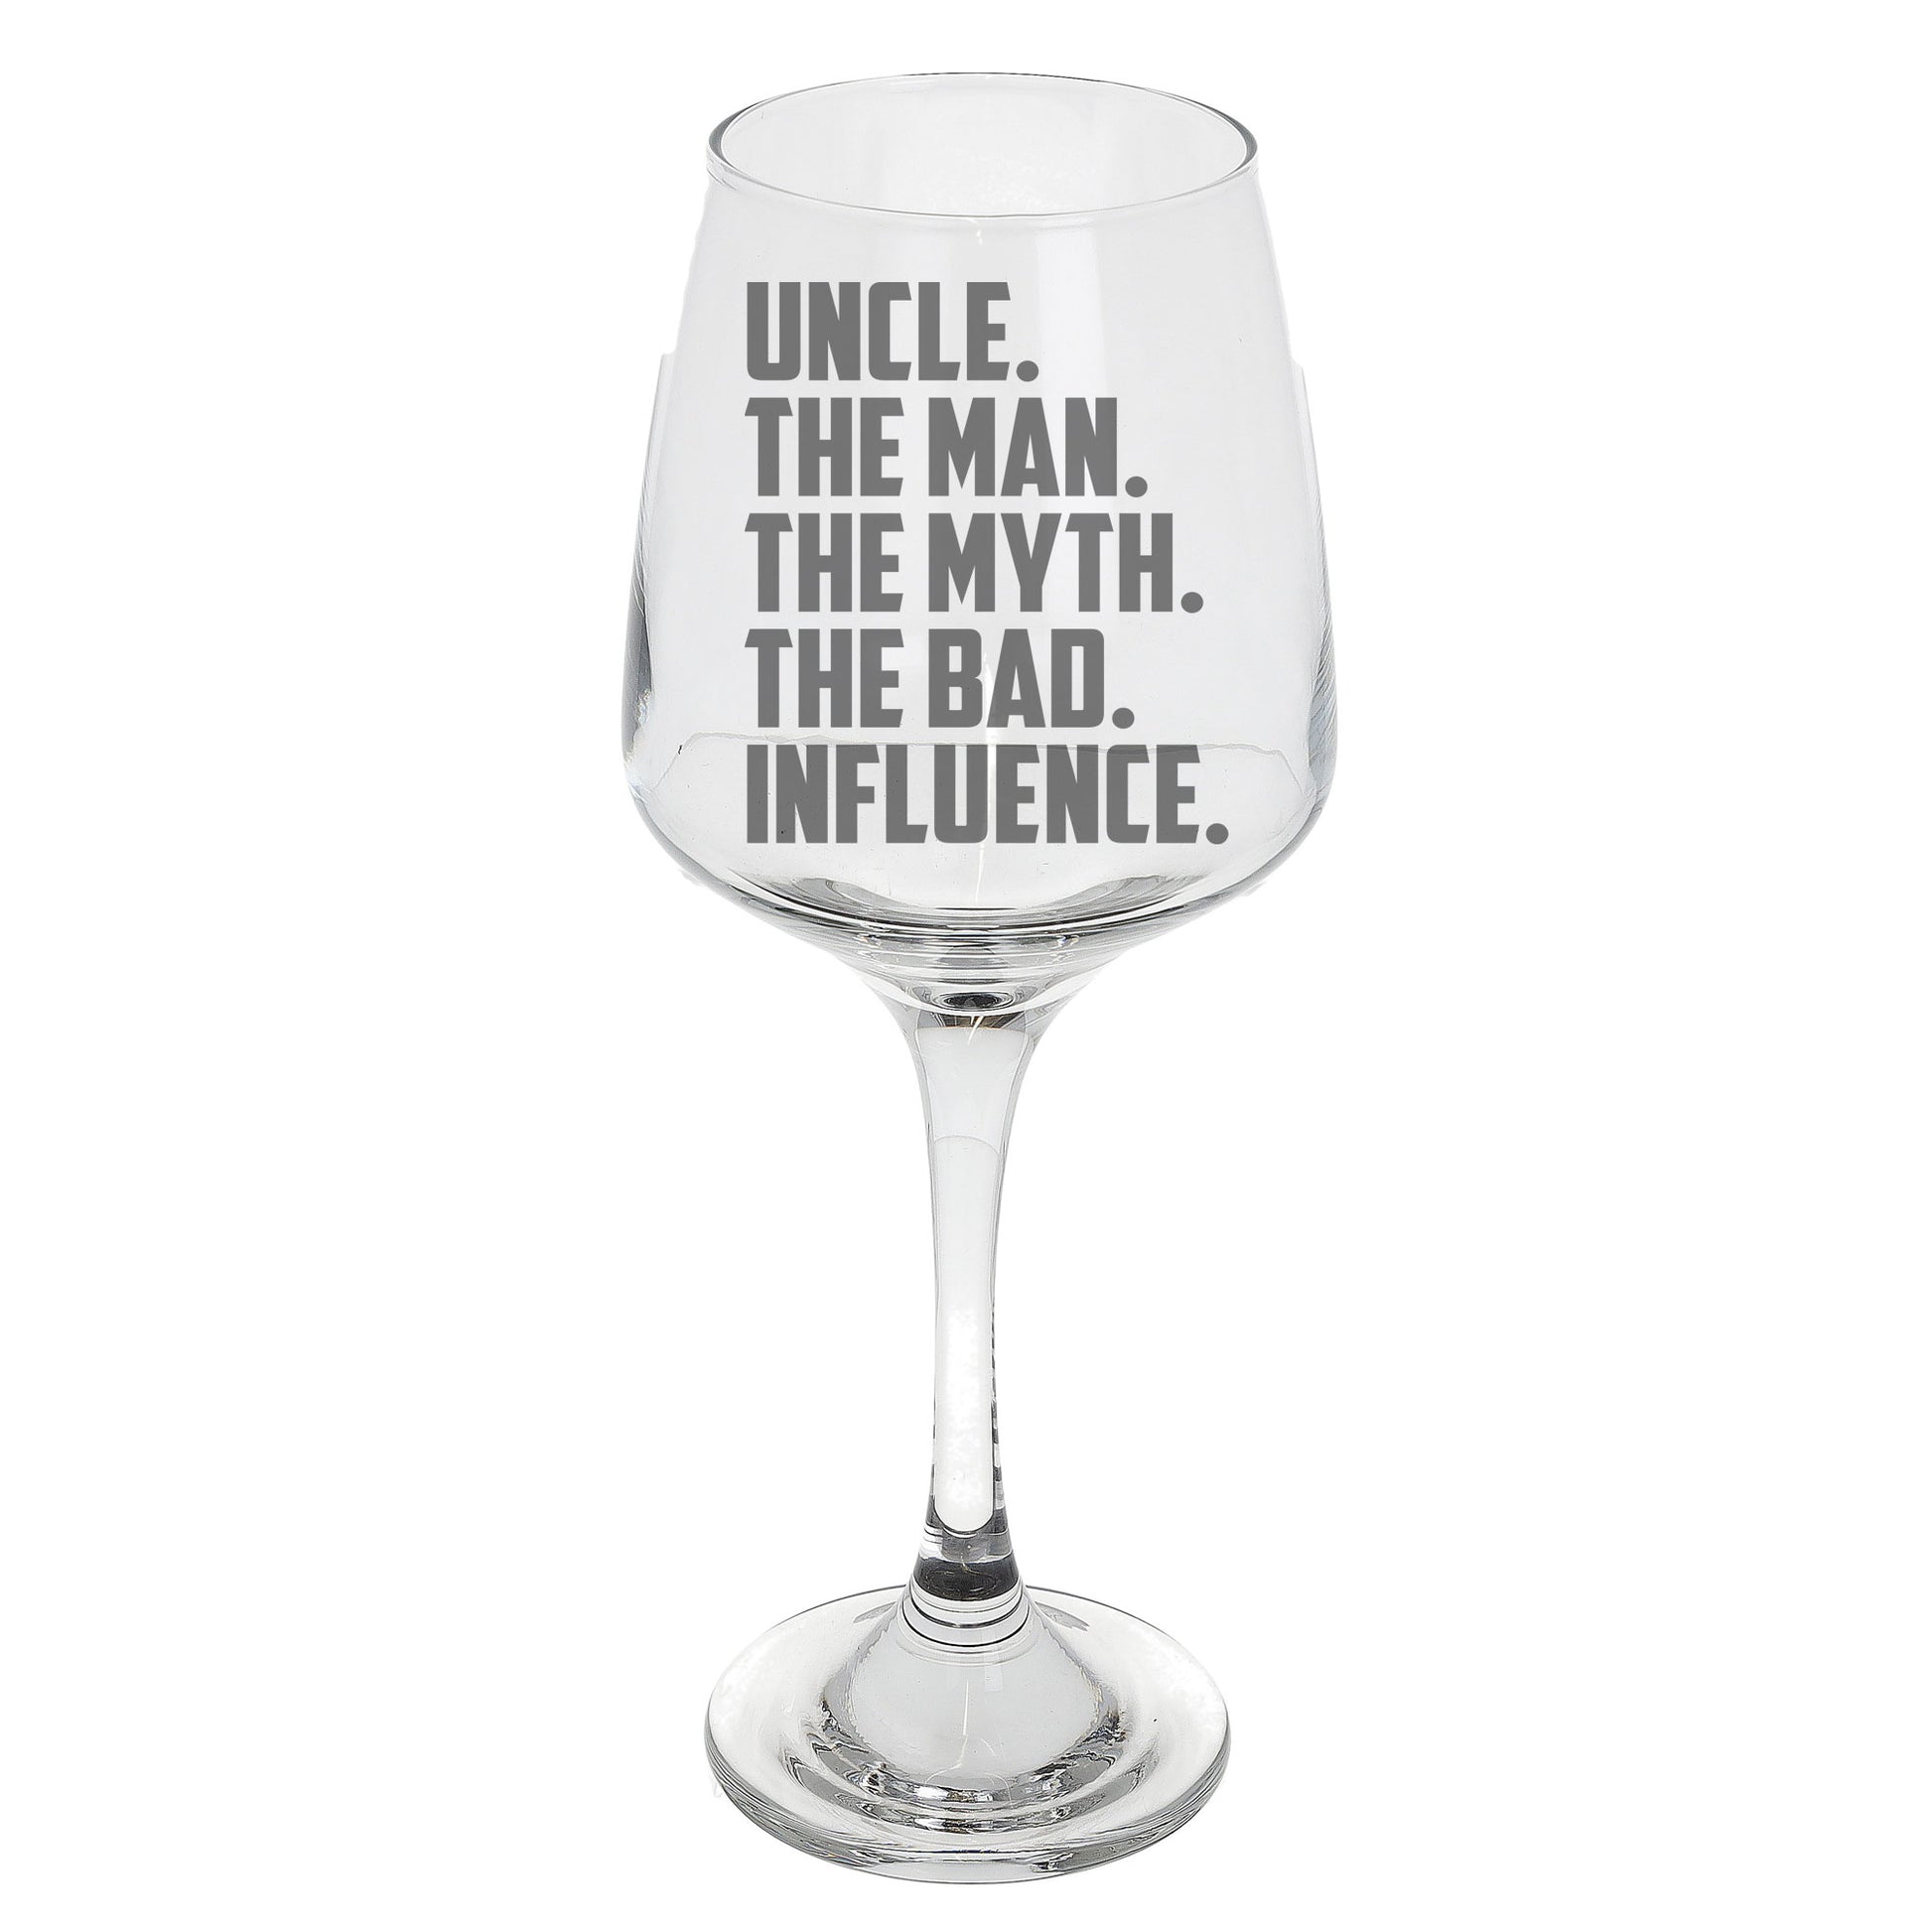 Uncle, The Man, The Myth, The Bad Influence Engraved Wine Glass and/or Coaster Set  - Always Looking Good - Wine Glass Only  